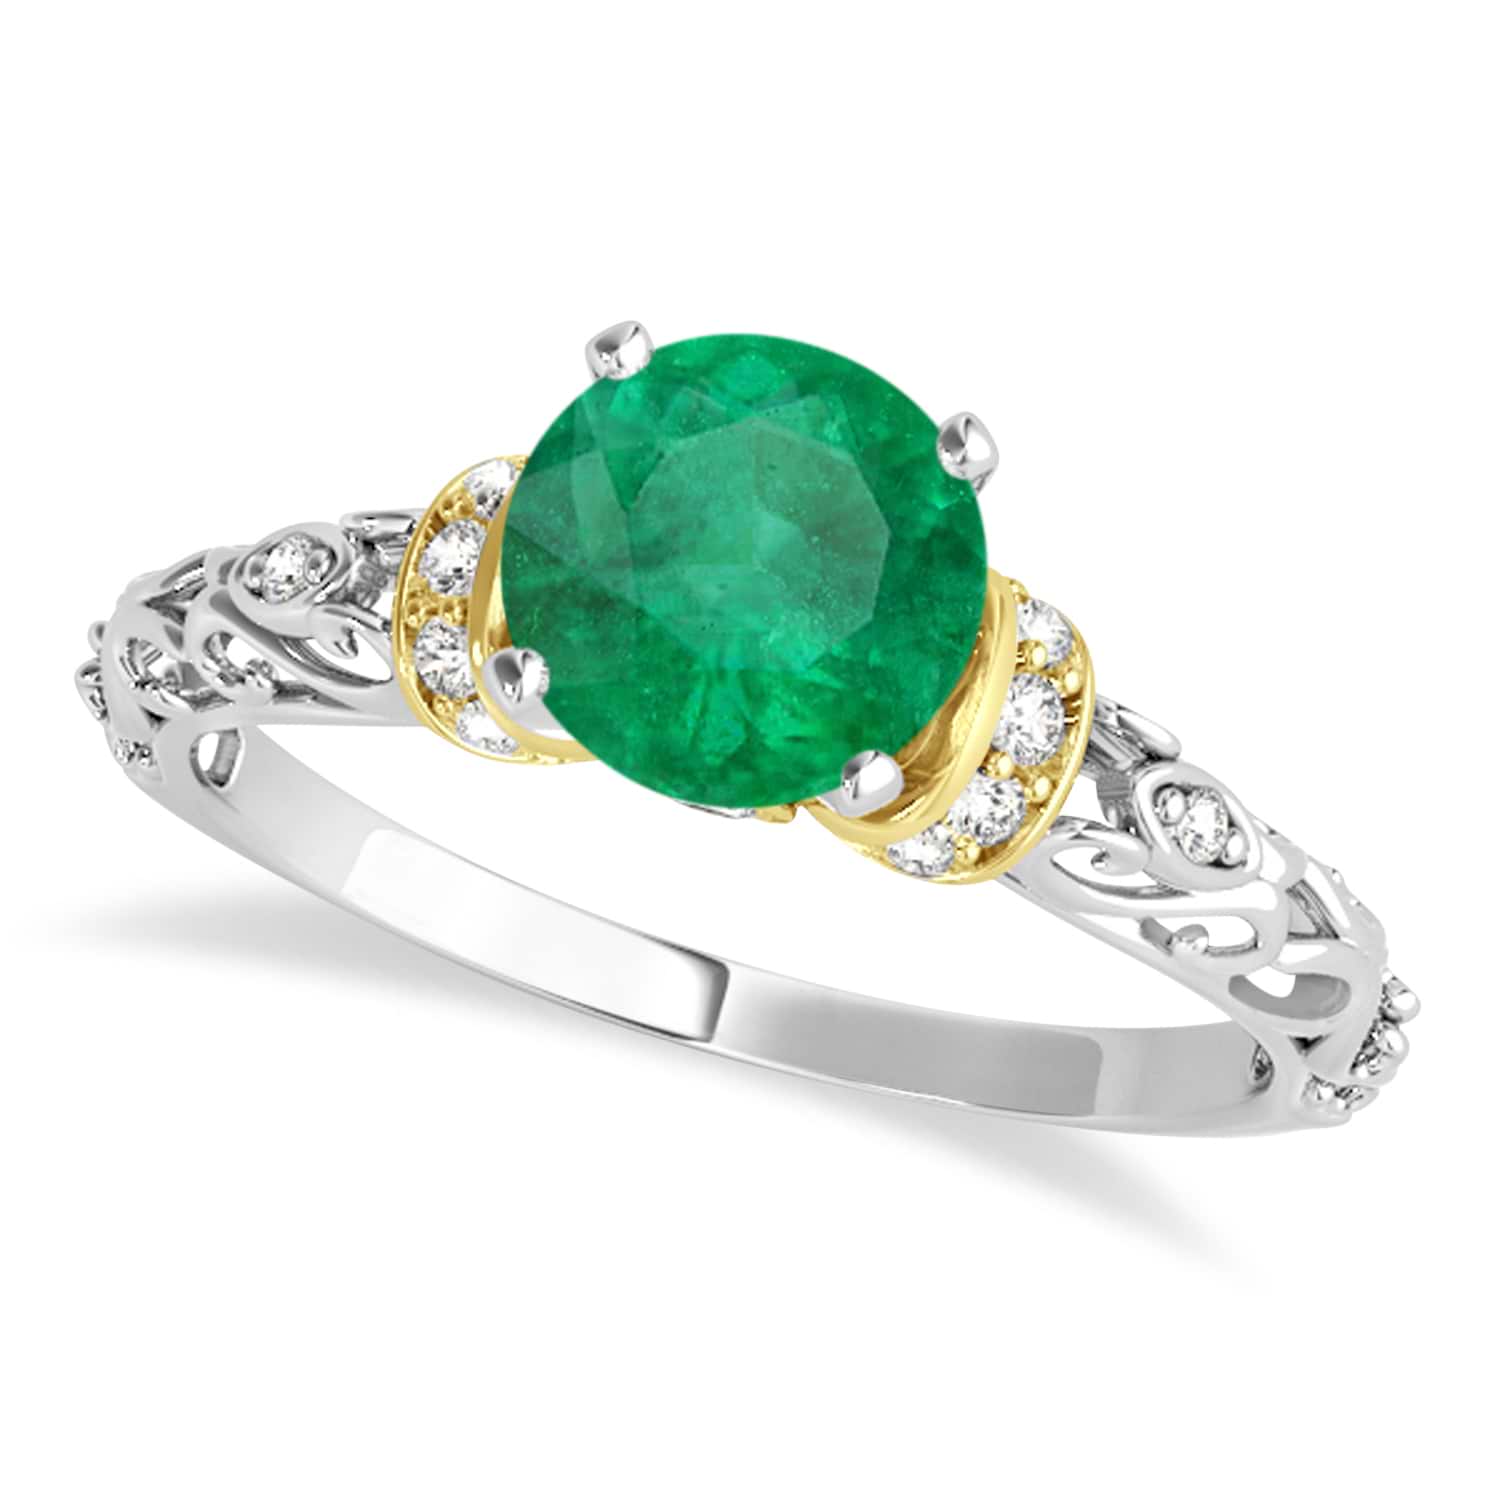 Emerald & Diamond Antique Style Engagement Ring 14k Two-Tone Gold (1.12ct)